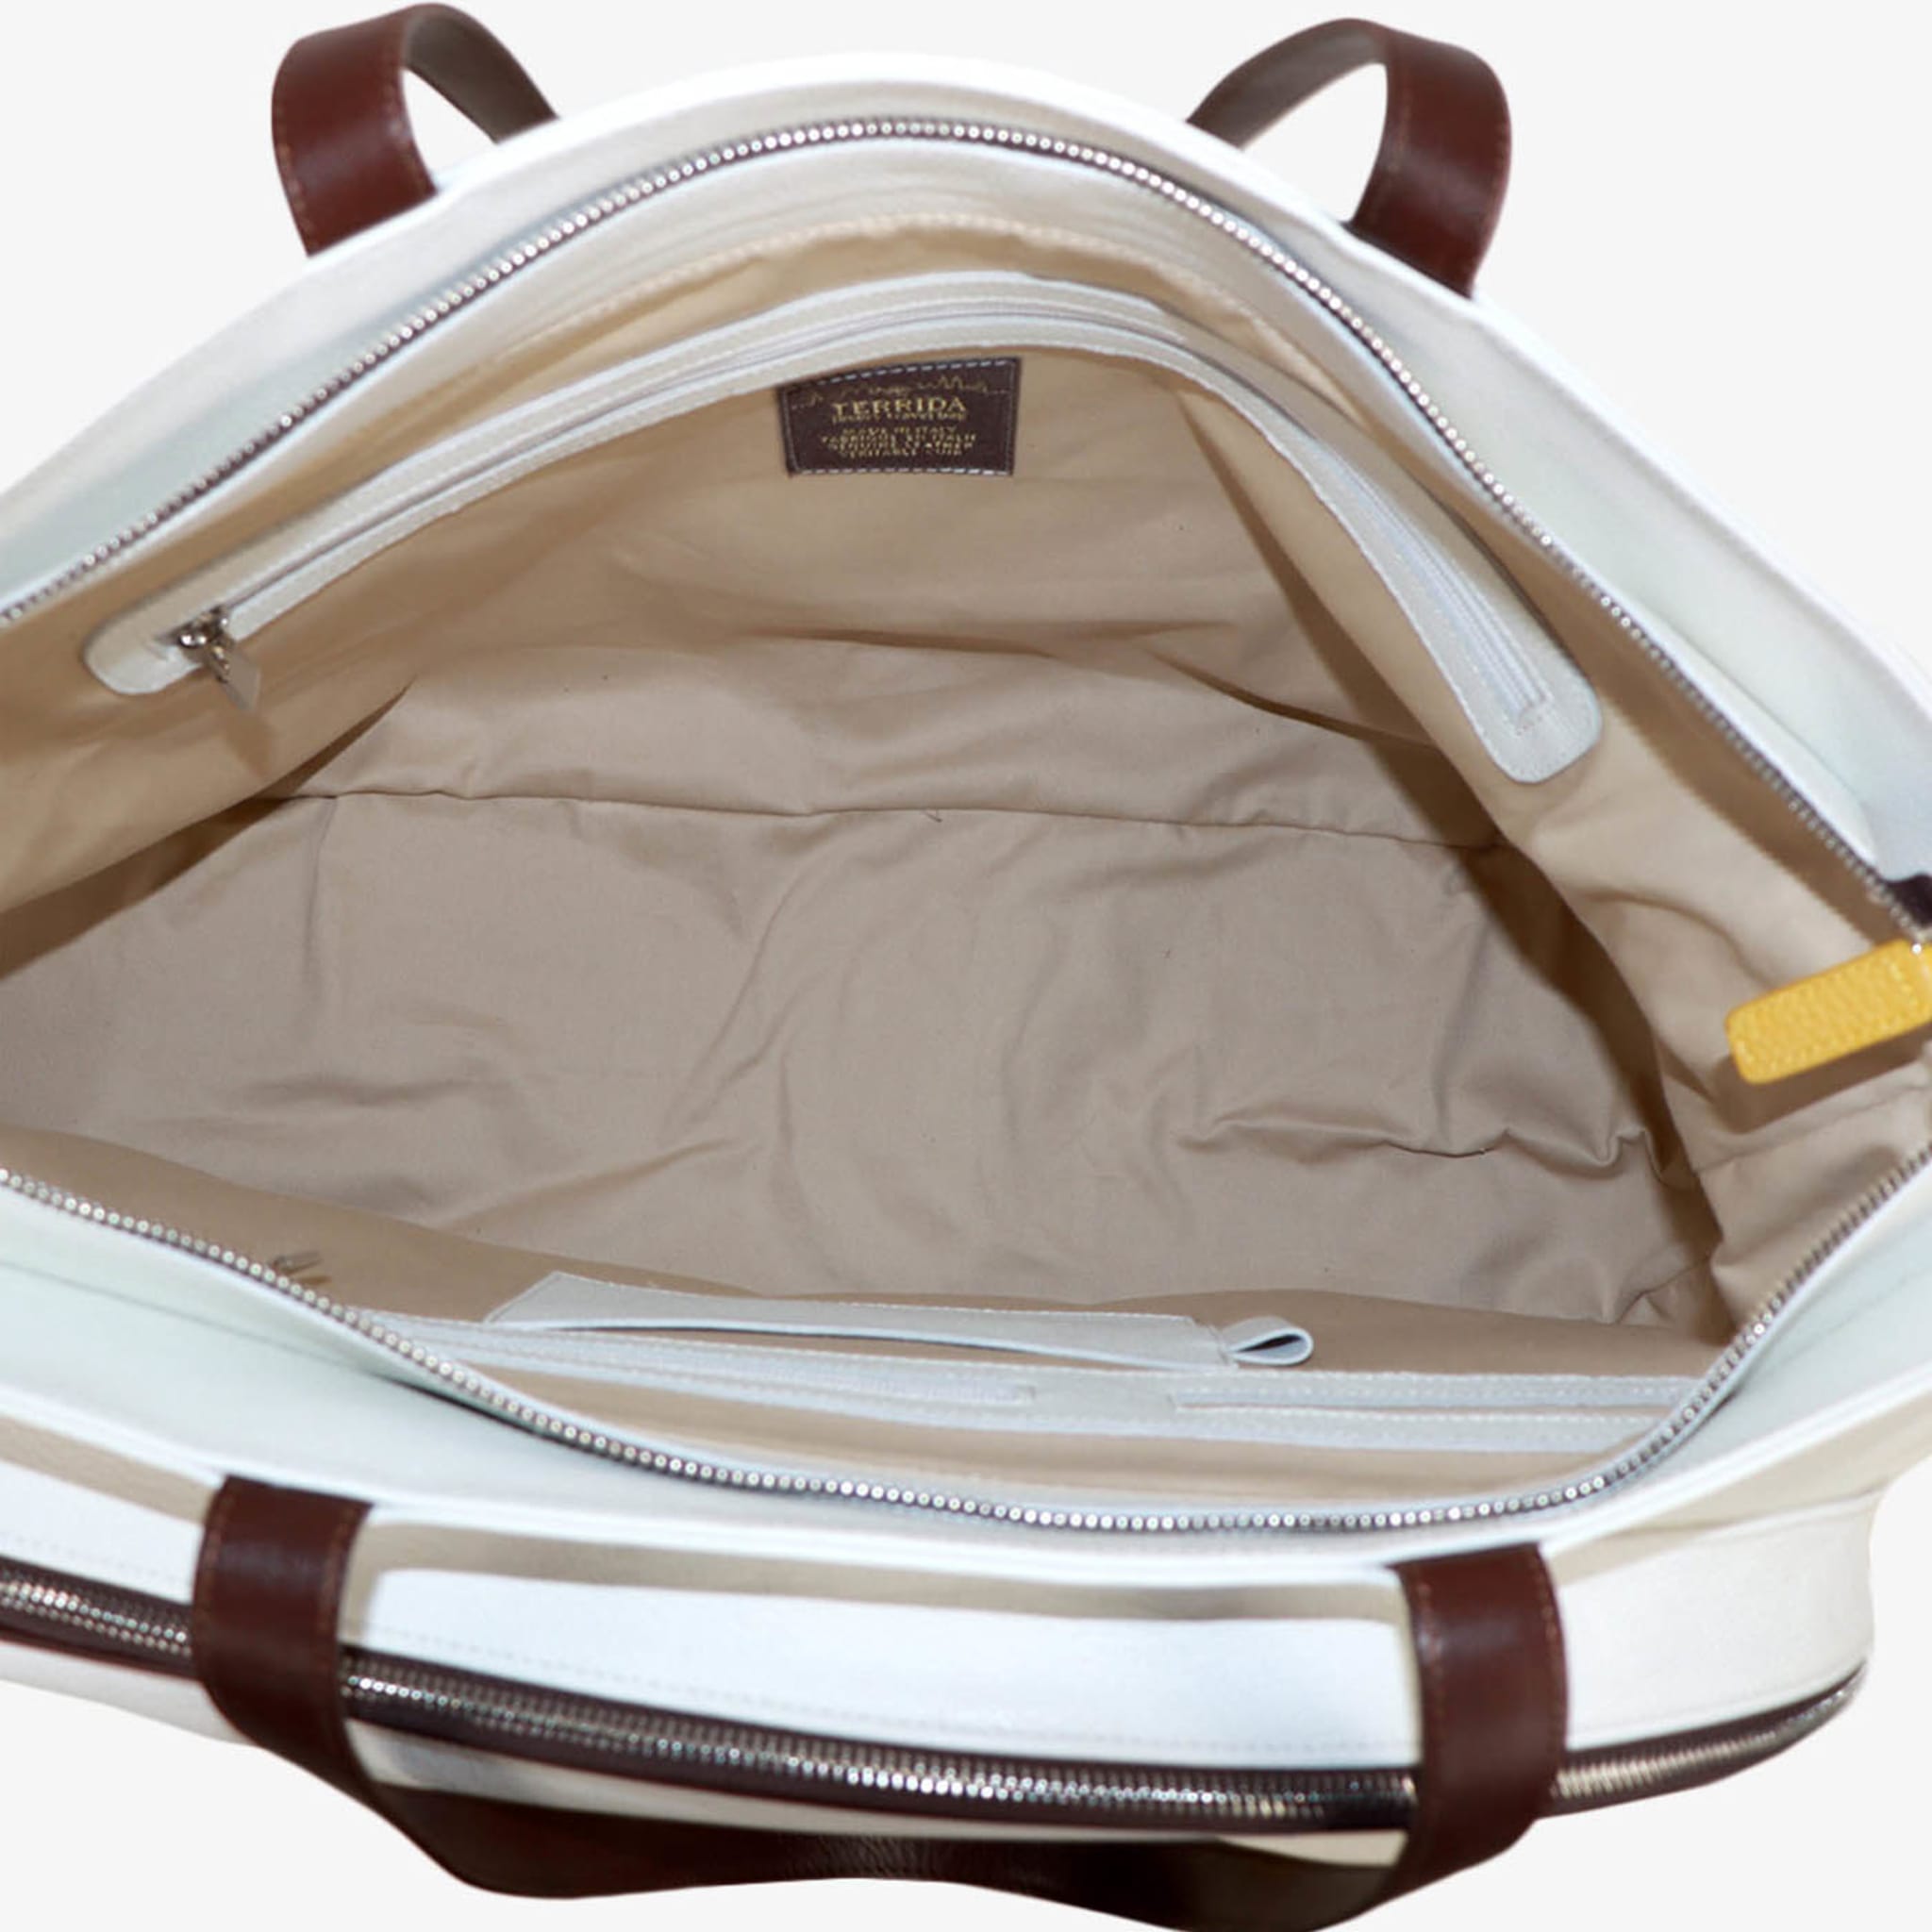 Sport White/Yellow/Brown Bag with Tennis-Racket-Shaped Pocket - Alternative view 5